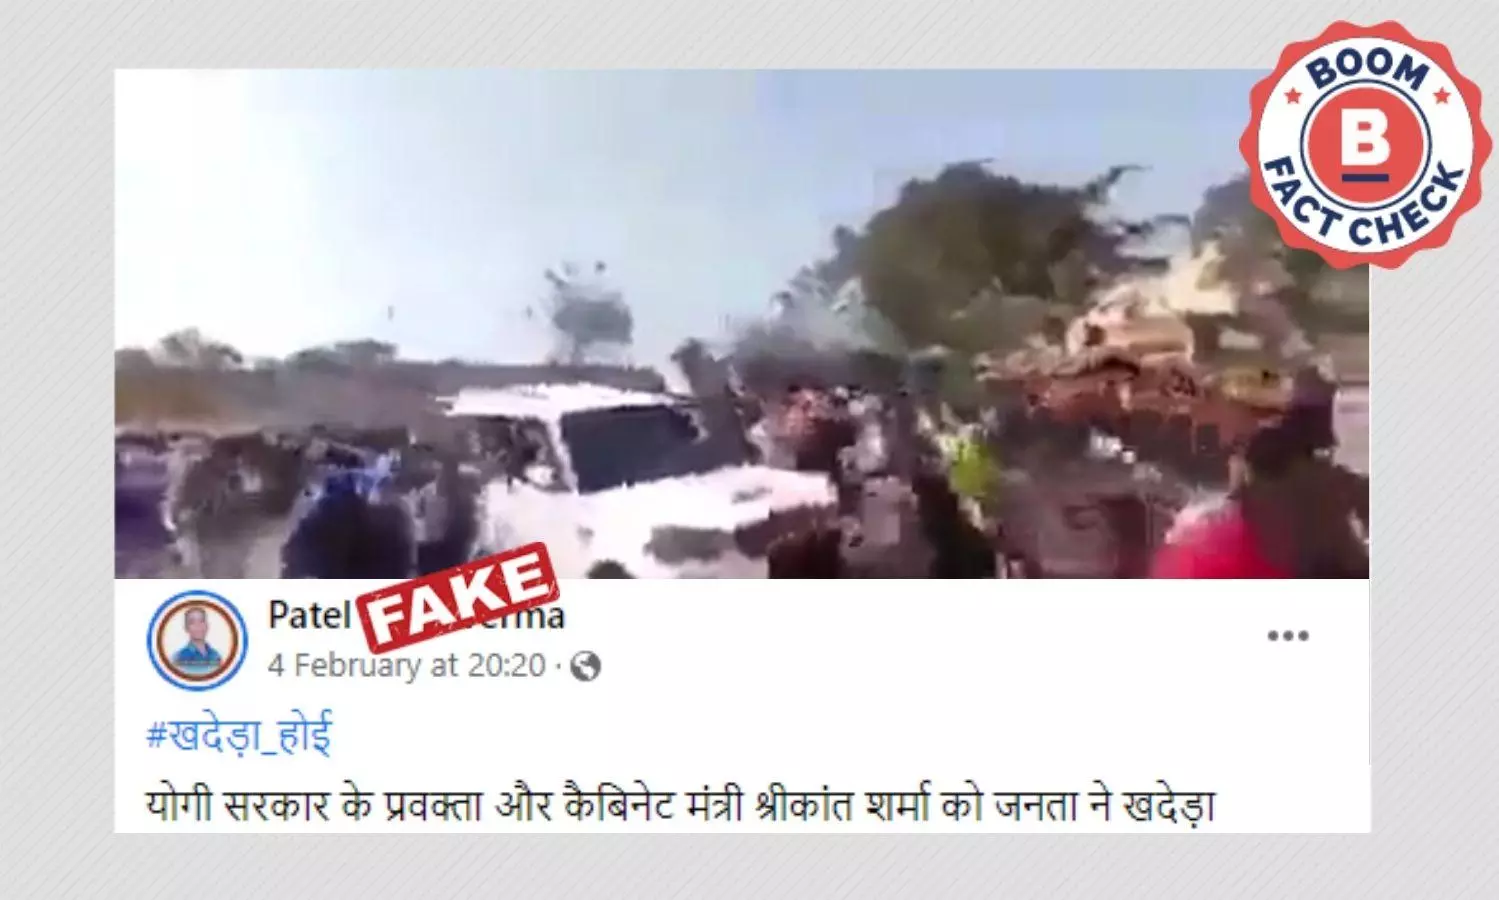 Video Of Attack On Former Jharkhand BJP Chief Shared With False Claim